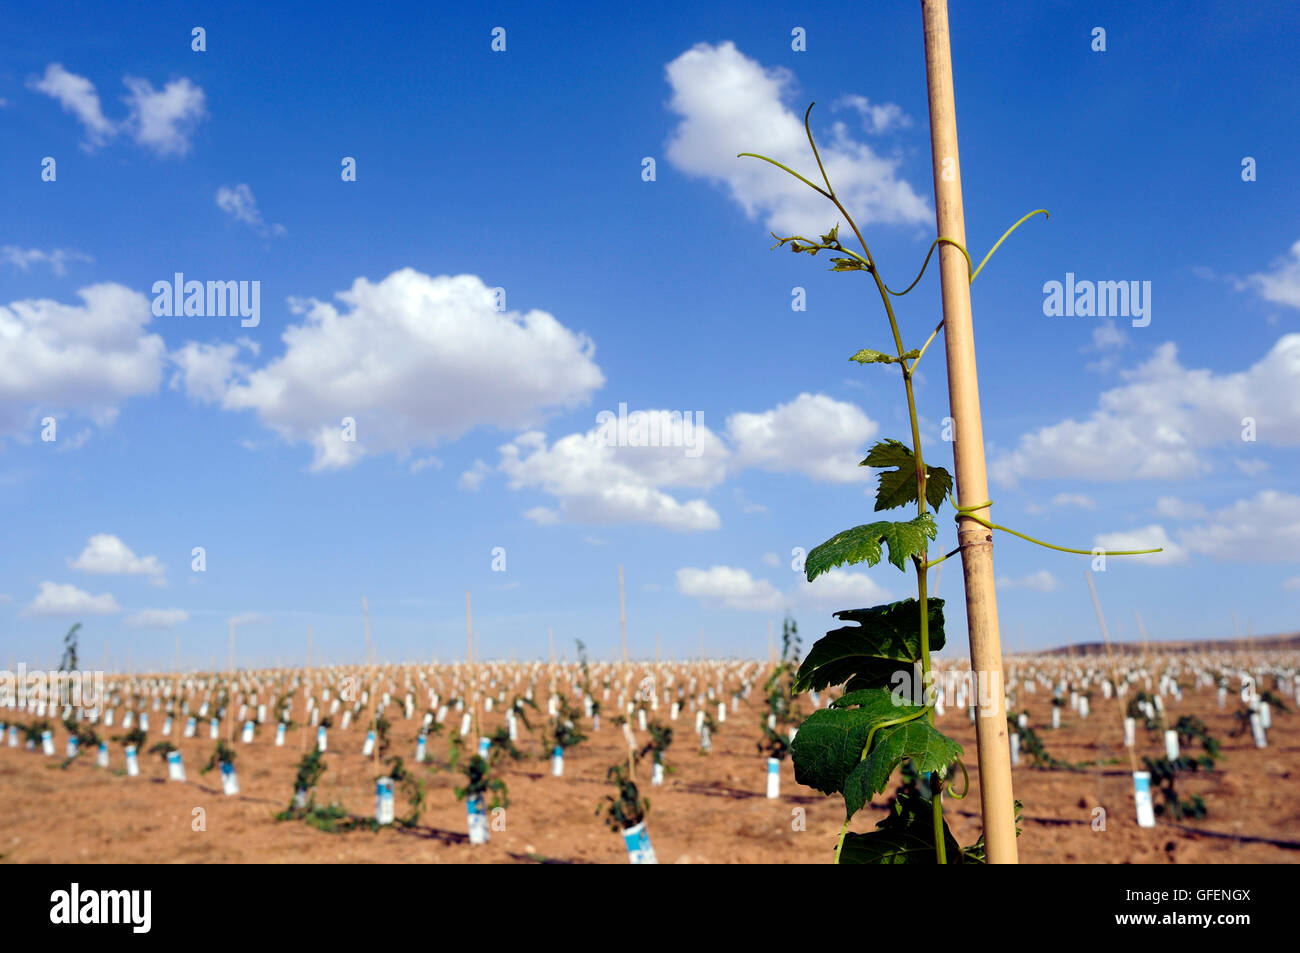 Israel, Negev, Lachish Region, young grape vines in a Vineyard, Stock Photo